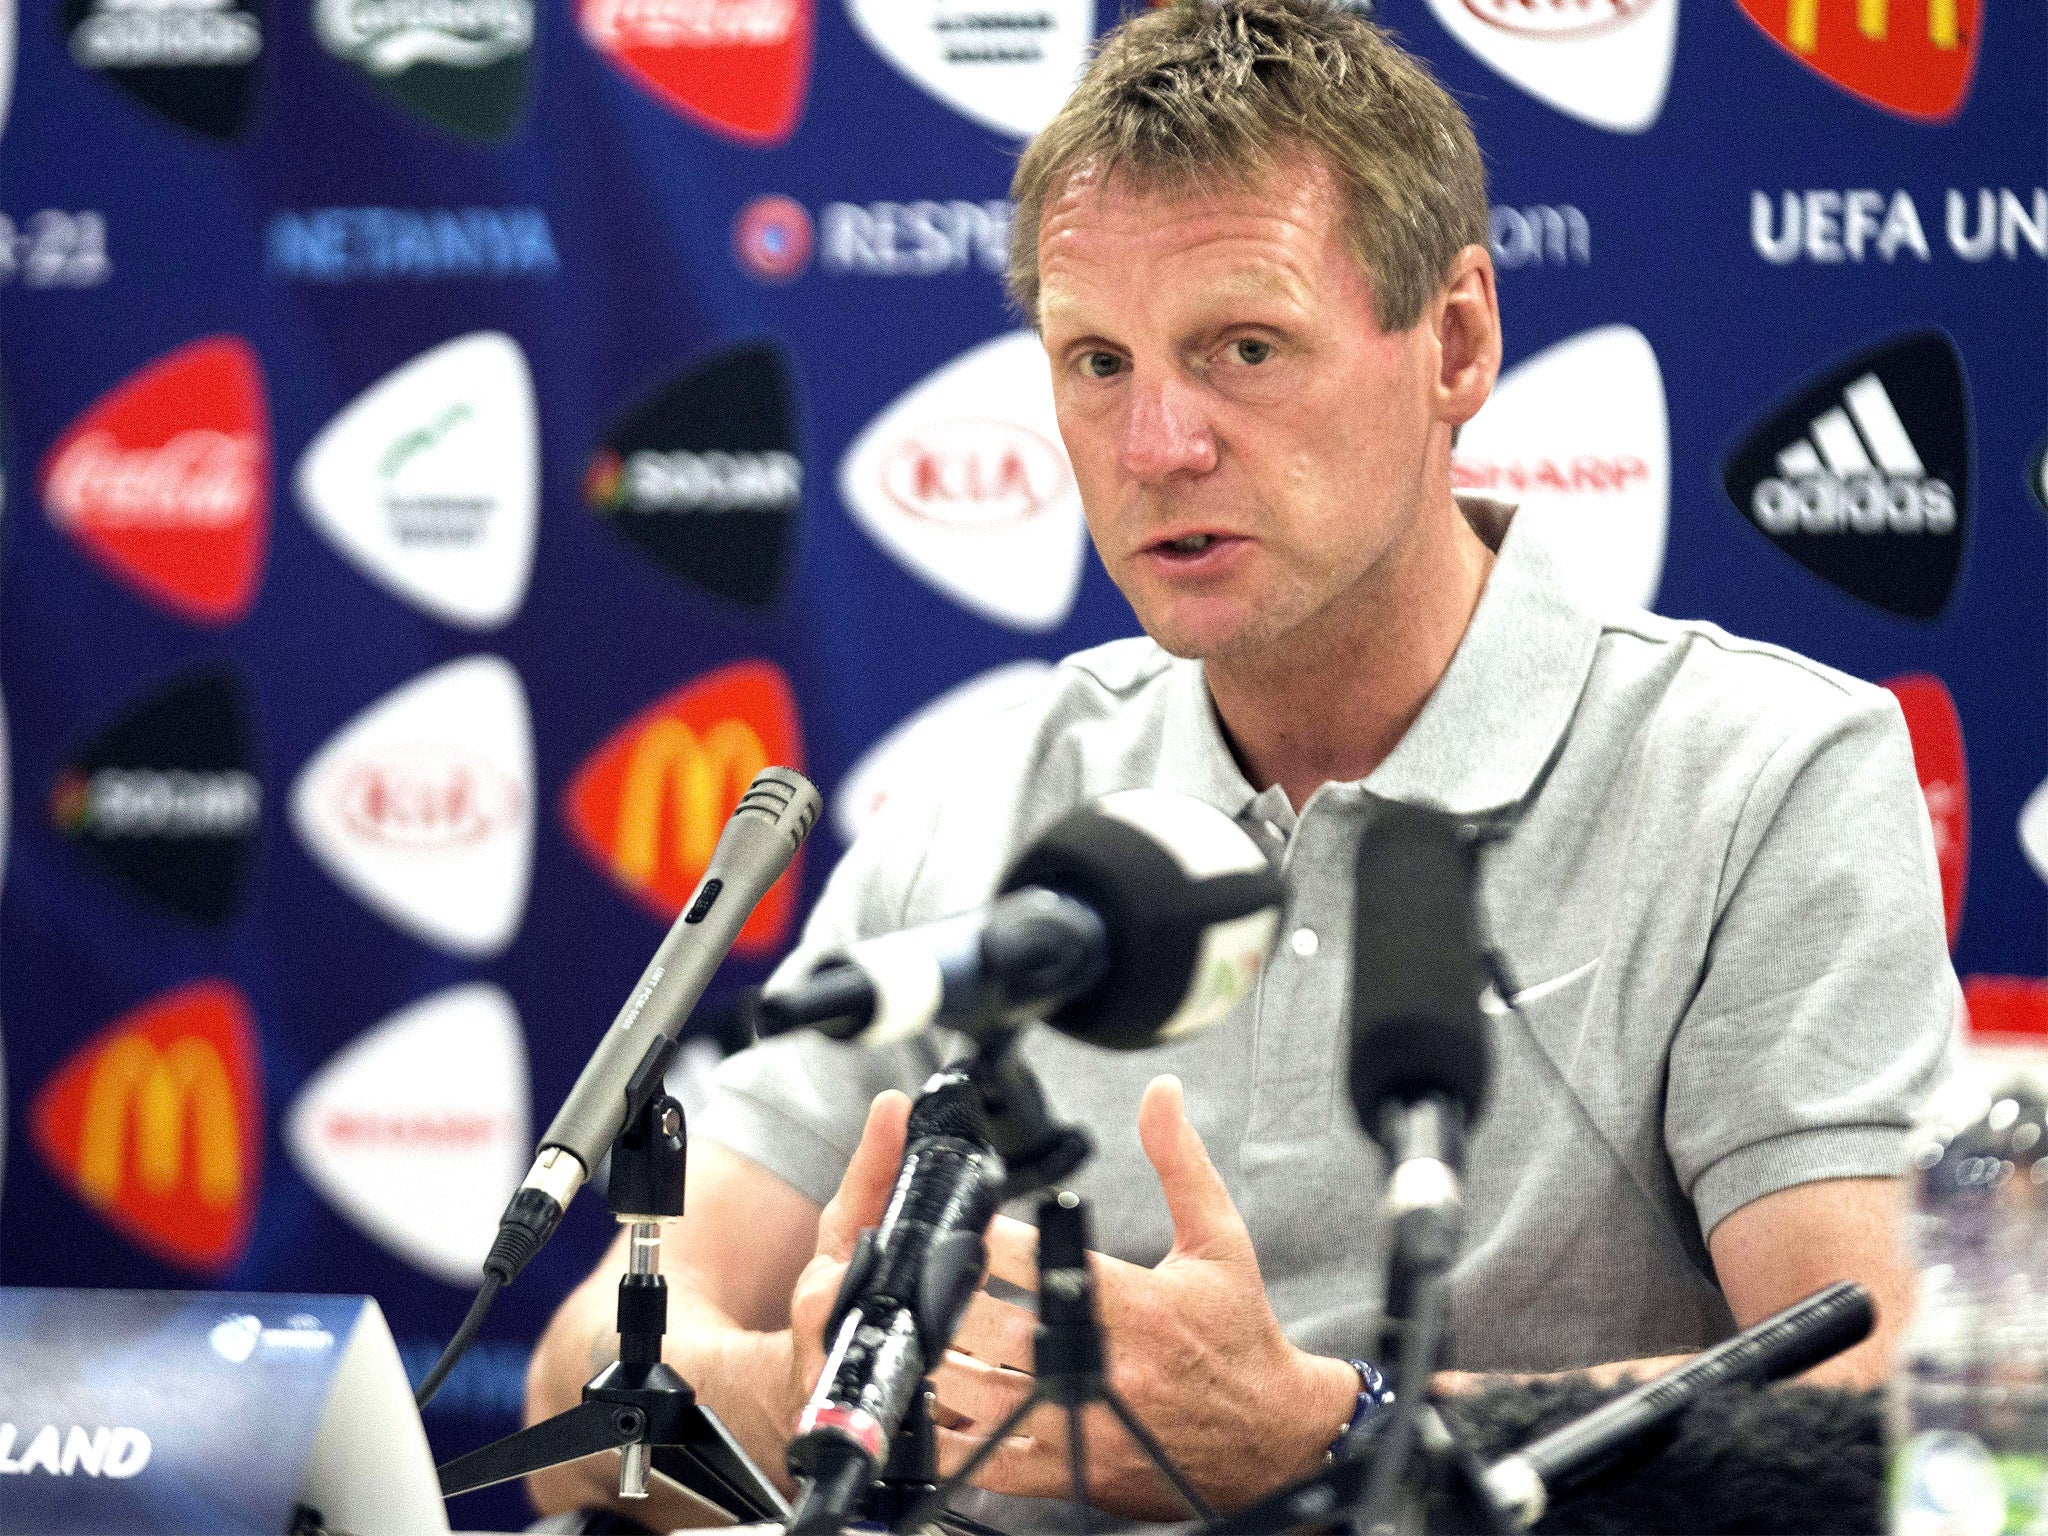 Stuart Pearce has a ‘burning ambition’ to win the tournament